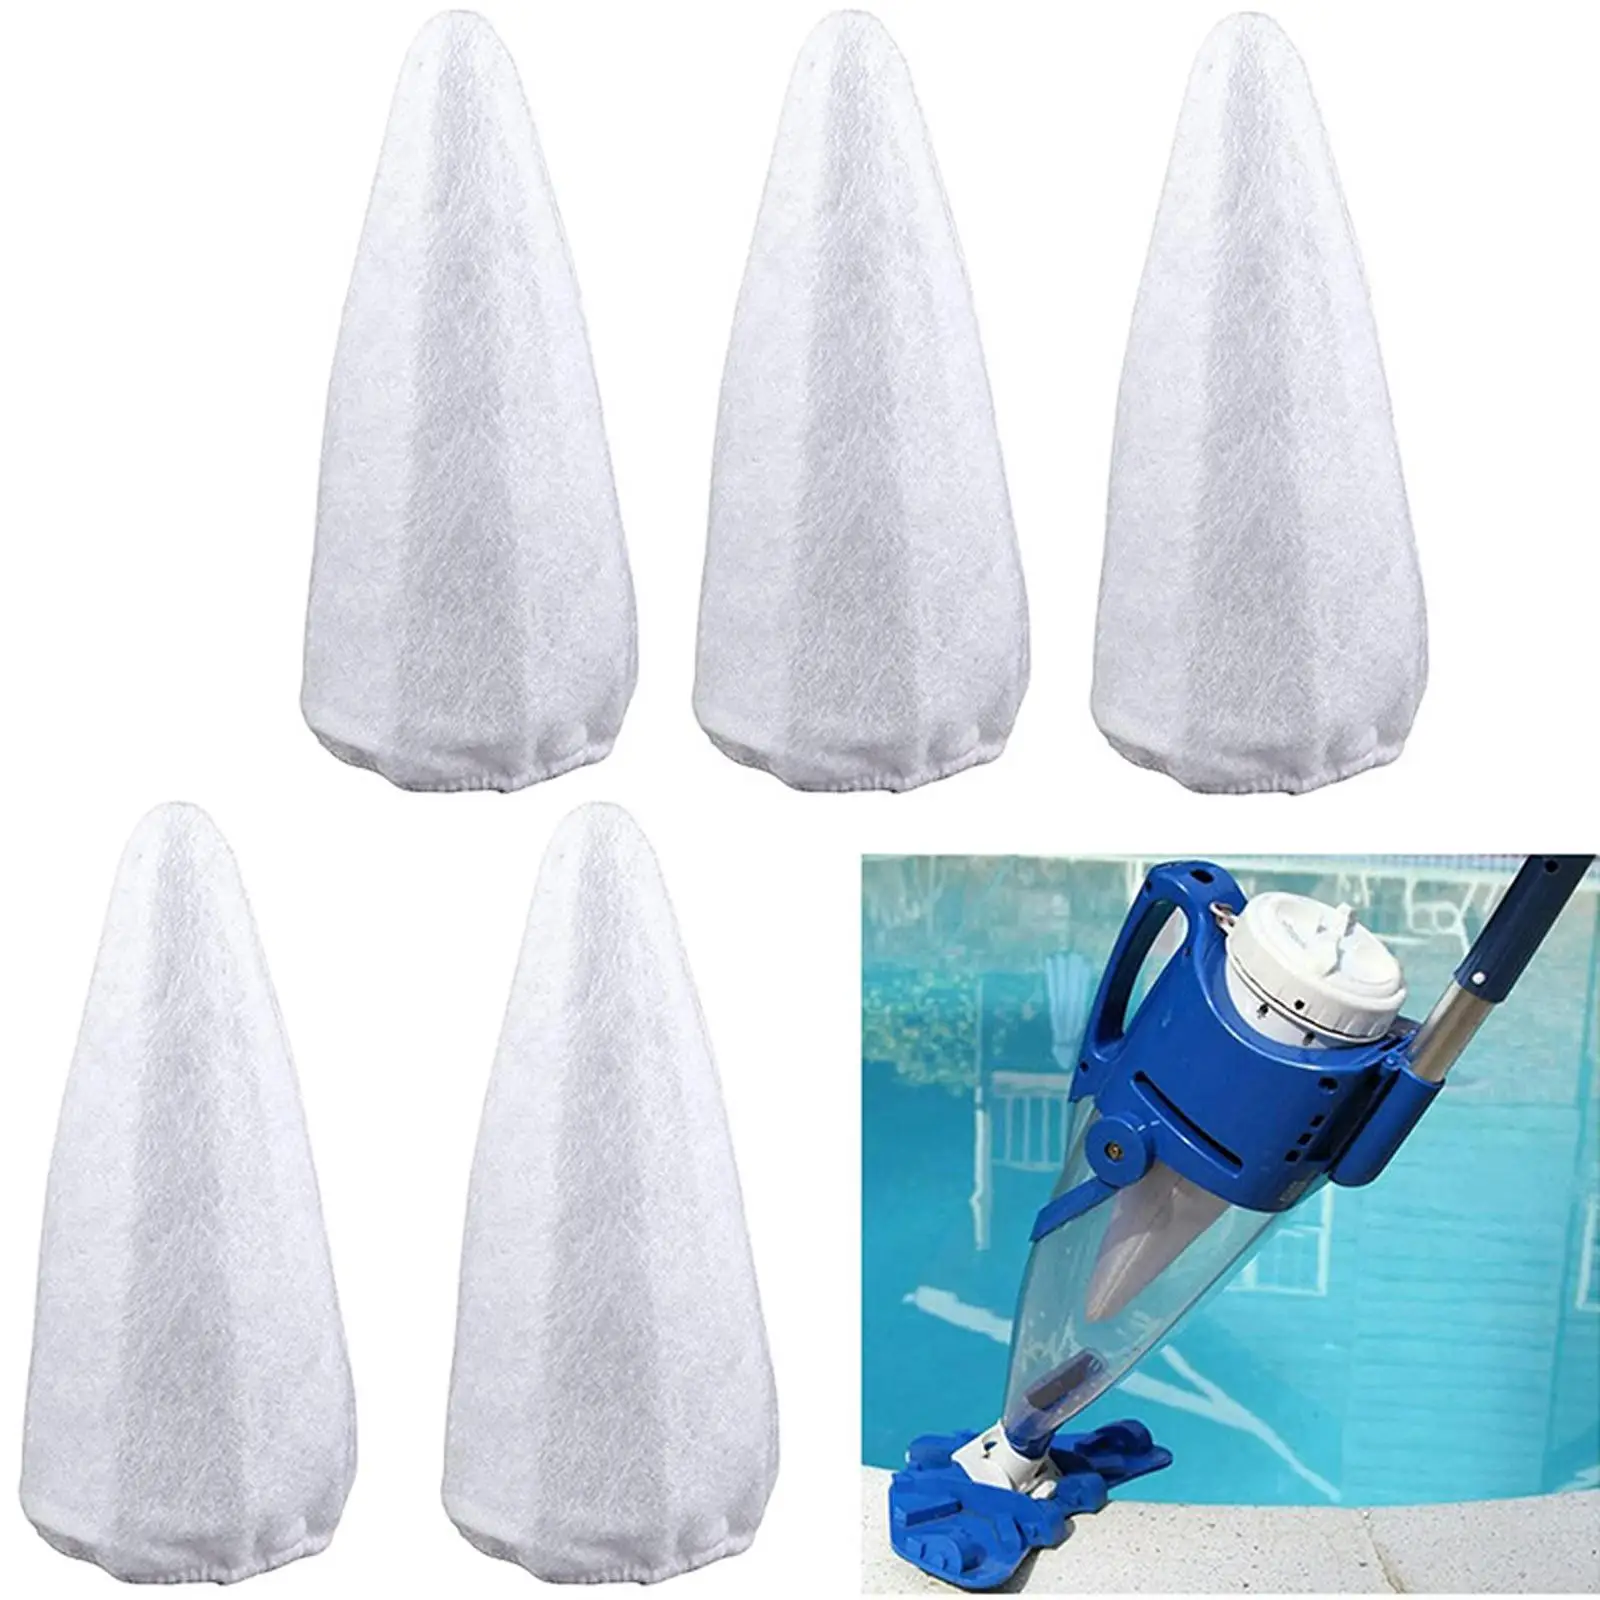 5 x Vacuum Filter Replacements Pool Filter Reusable Cotton Filter Bag Sand and Silt Pool Vacuum Filter Bag for Pool Vacuum